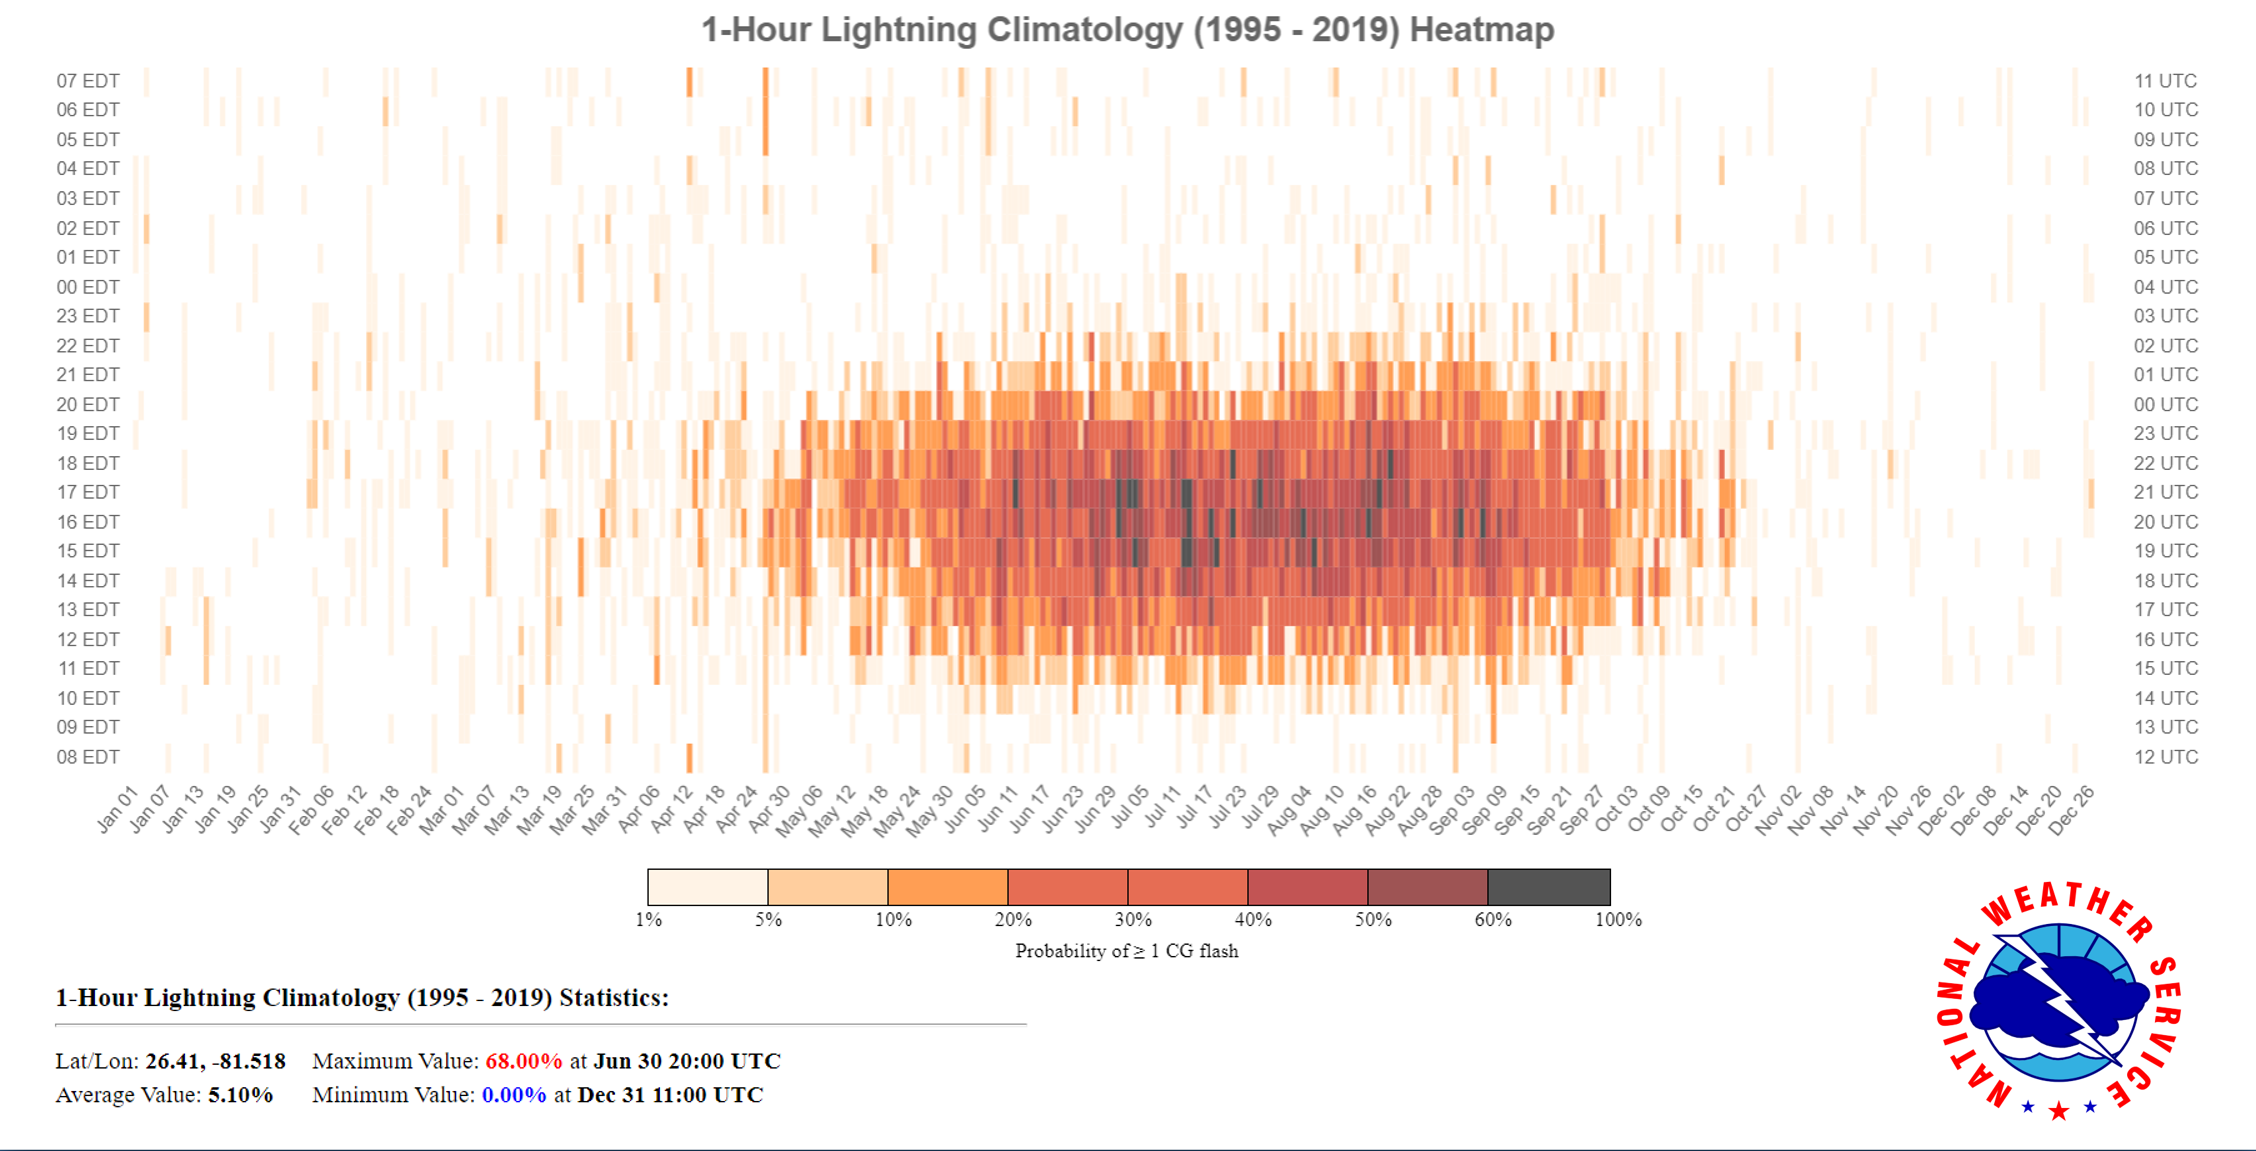 The Heatmap for Tampa, Florida, shows lightning activity on average for each hour and days of the year.